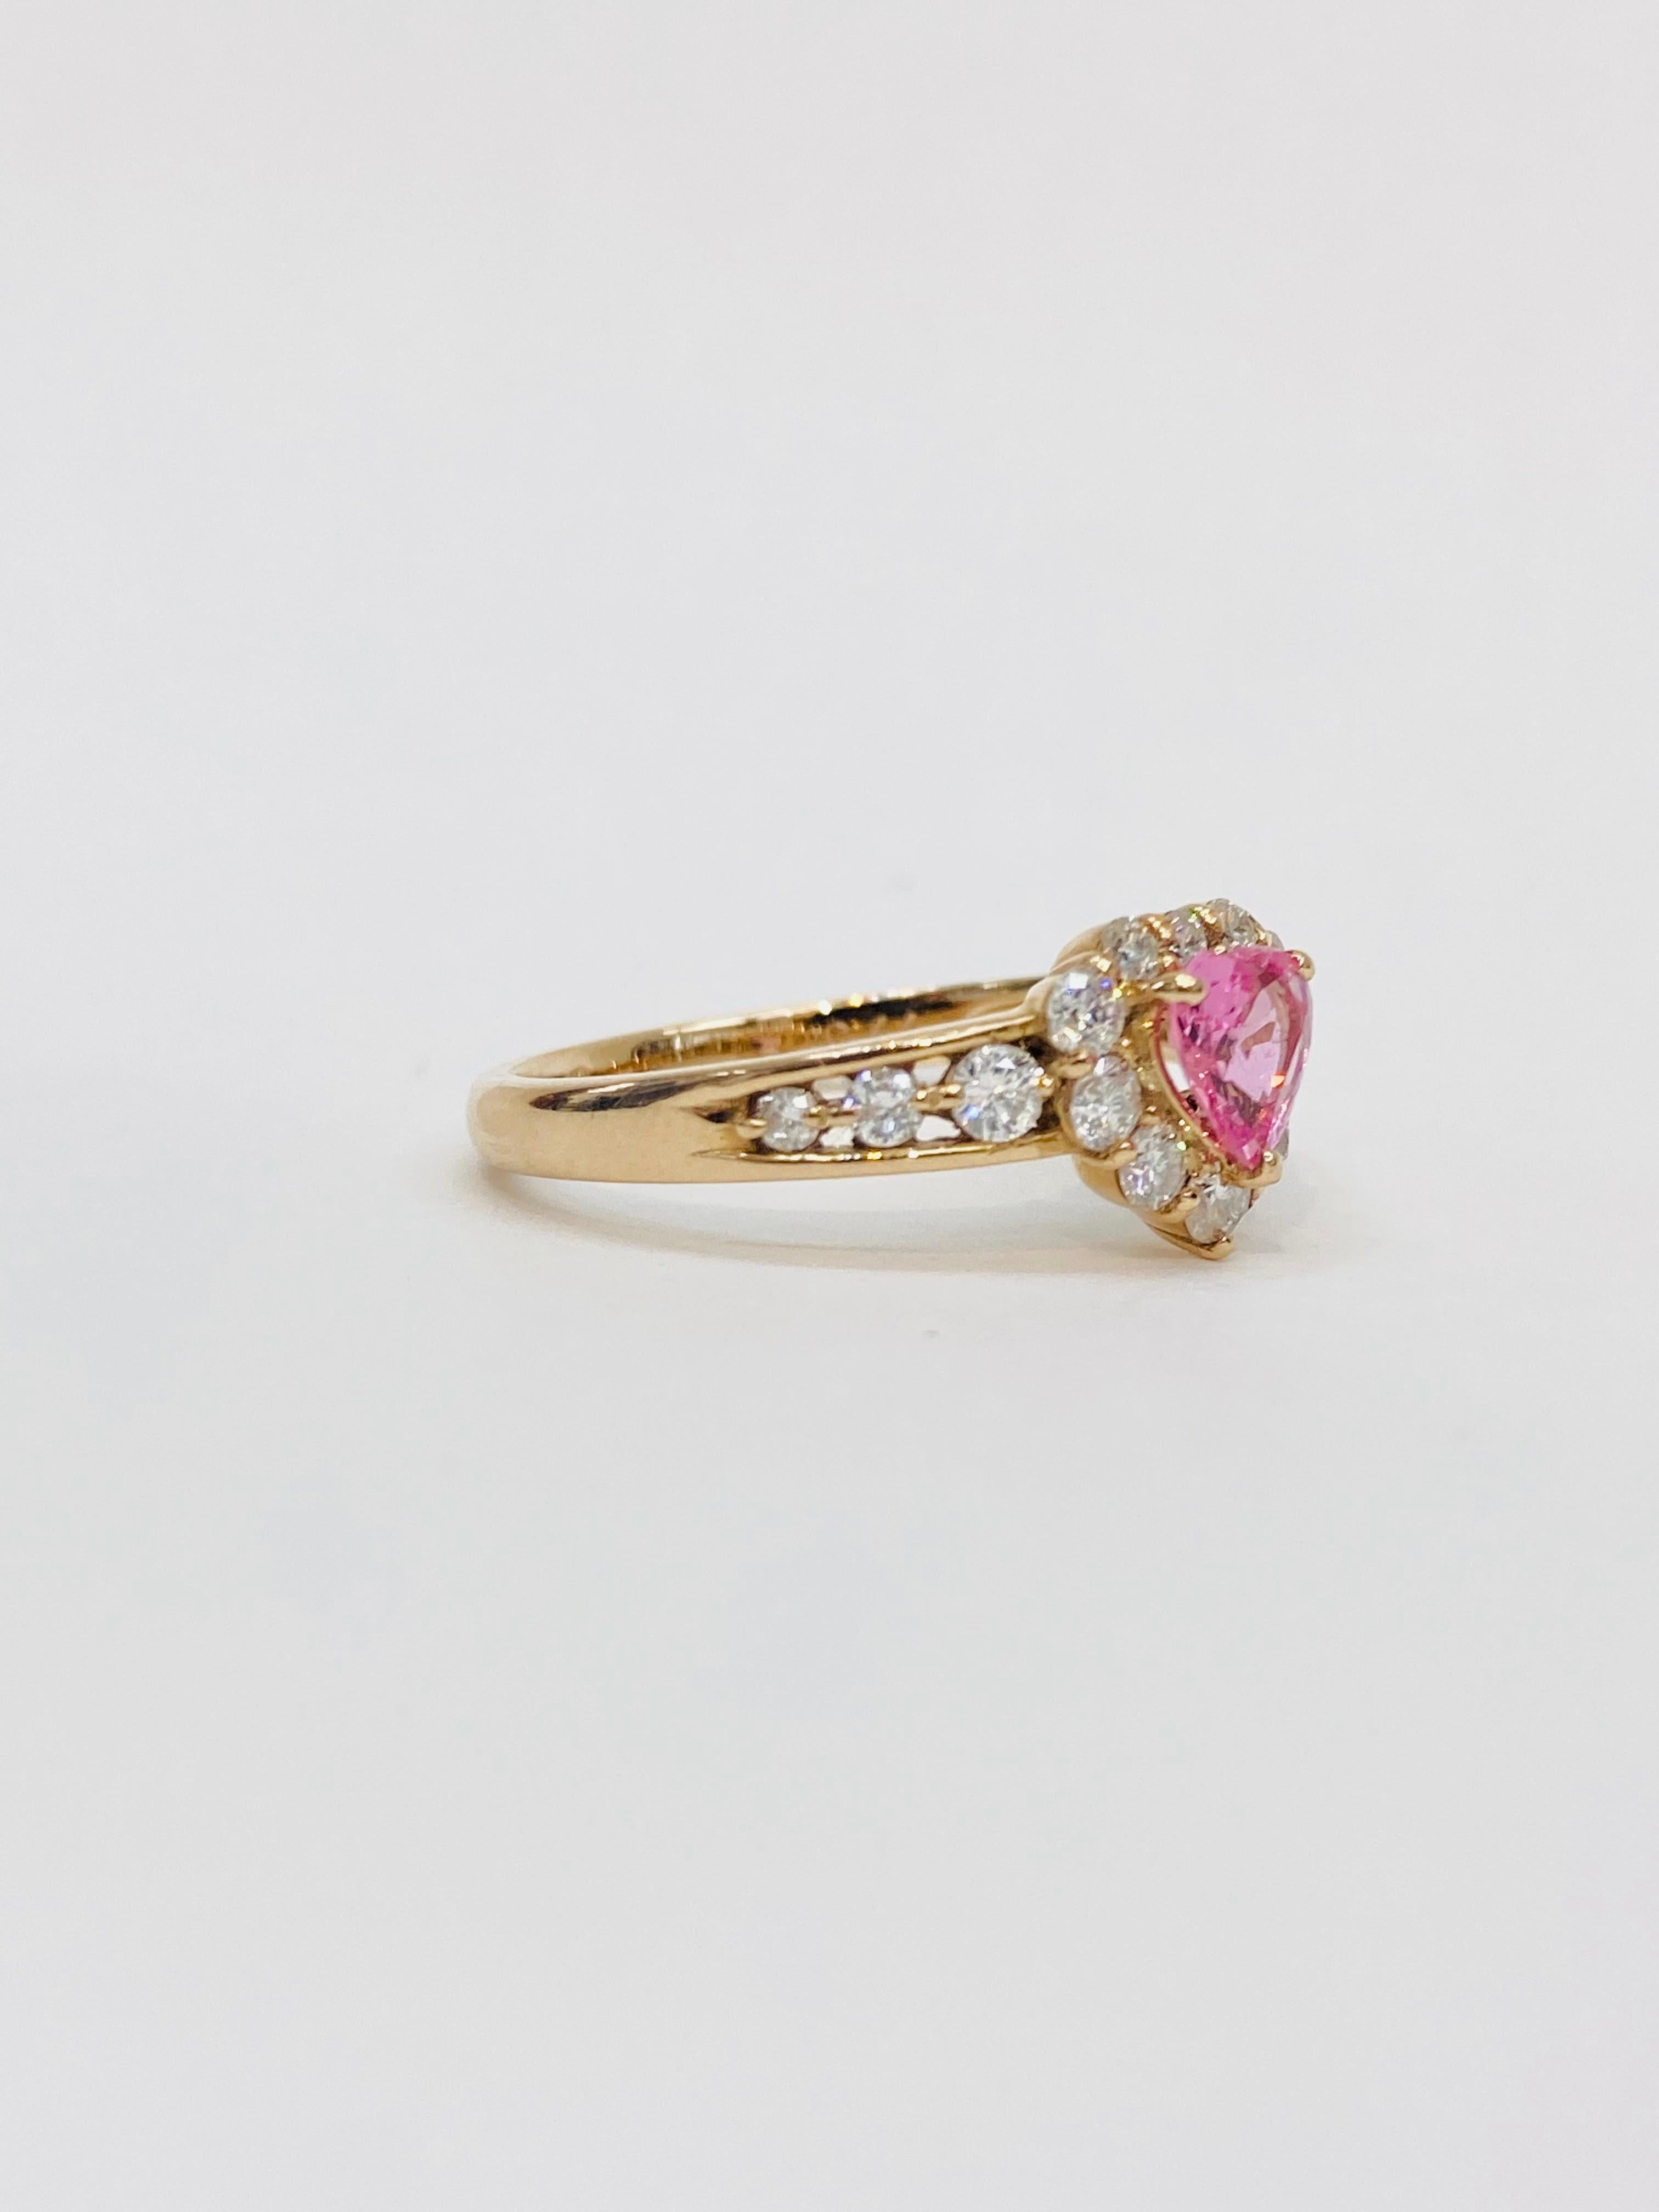 Bochic “Padparadscha” Pink Sapphire & Diamond Cluster 18K Gold Ring  For Sale 6